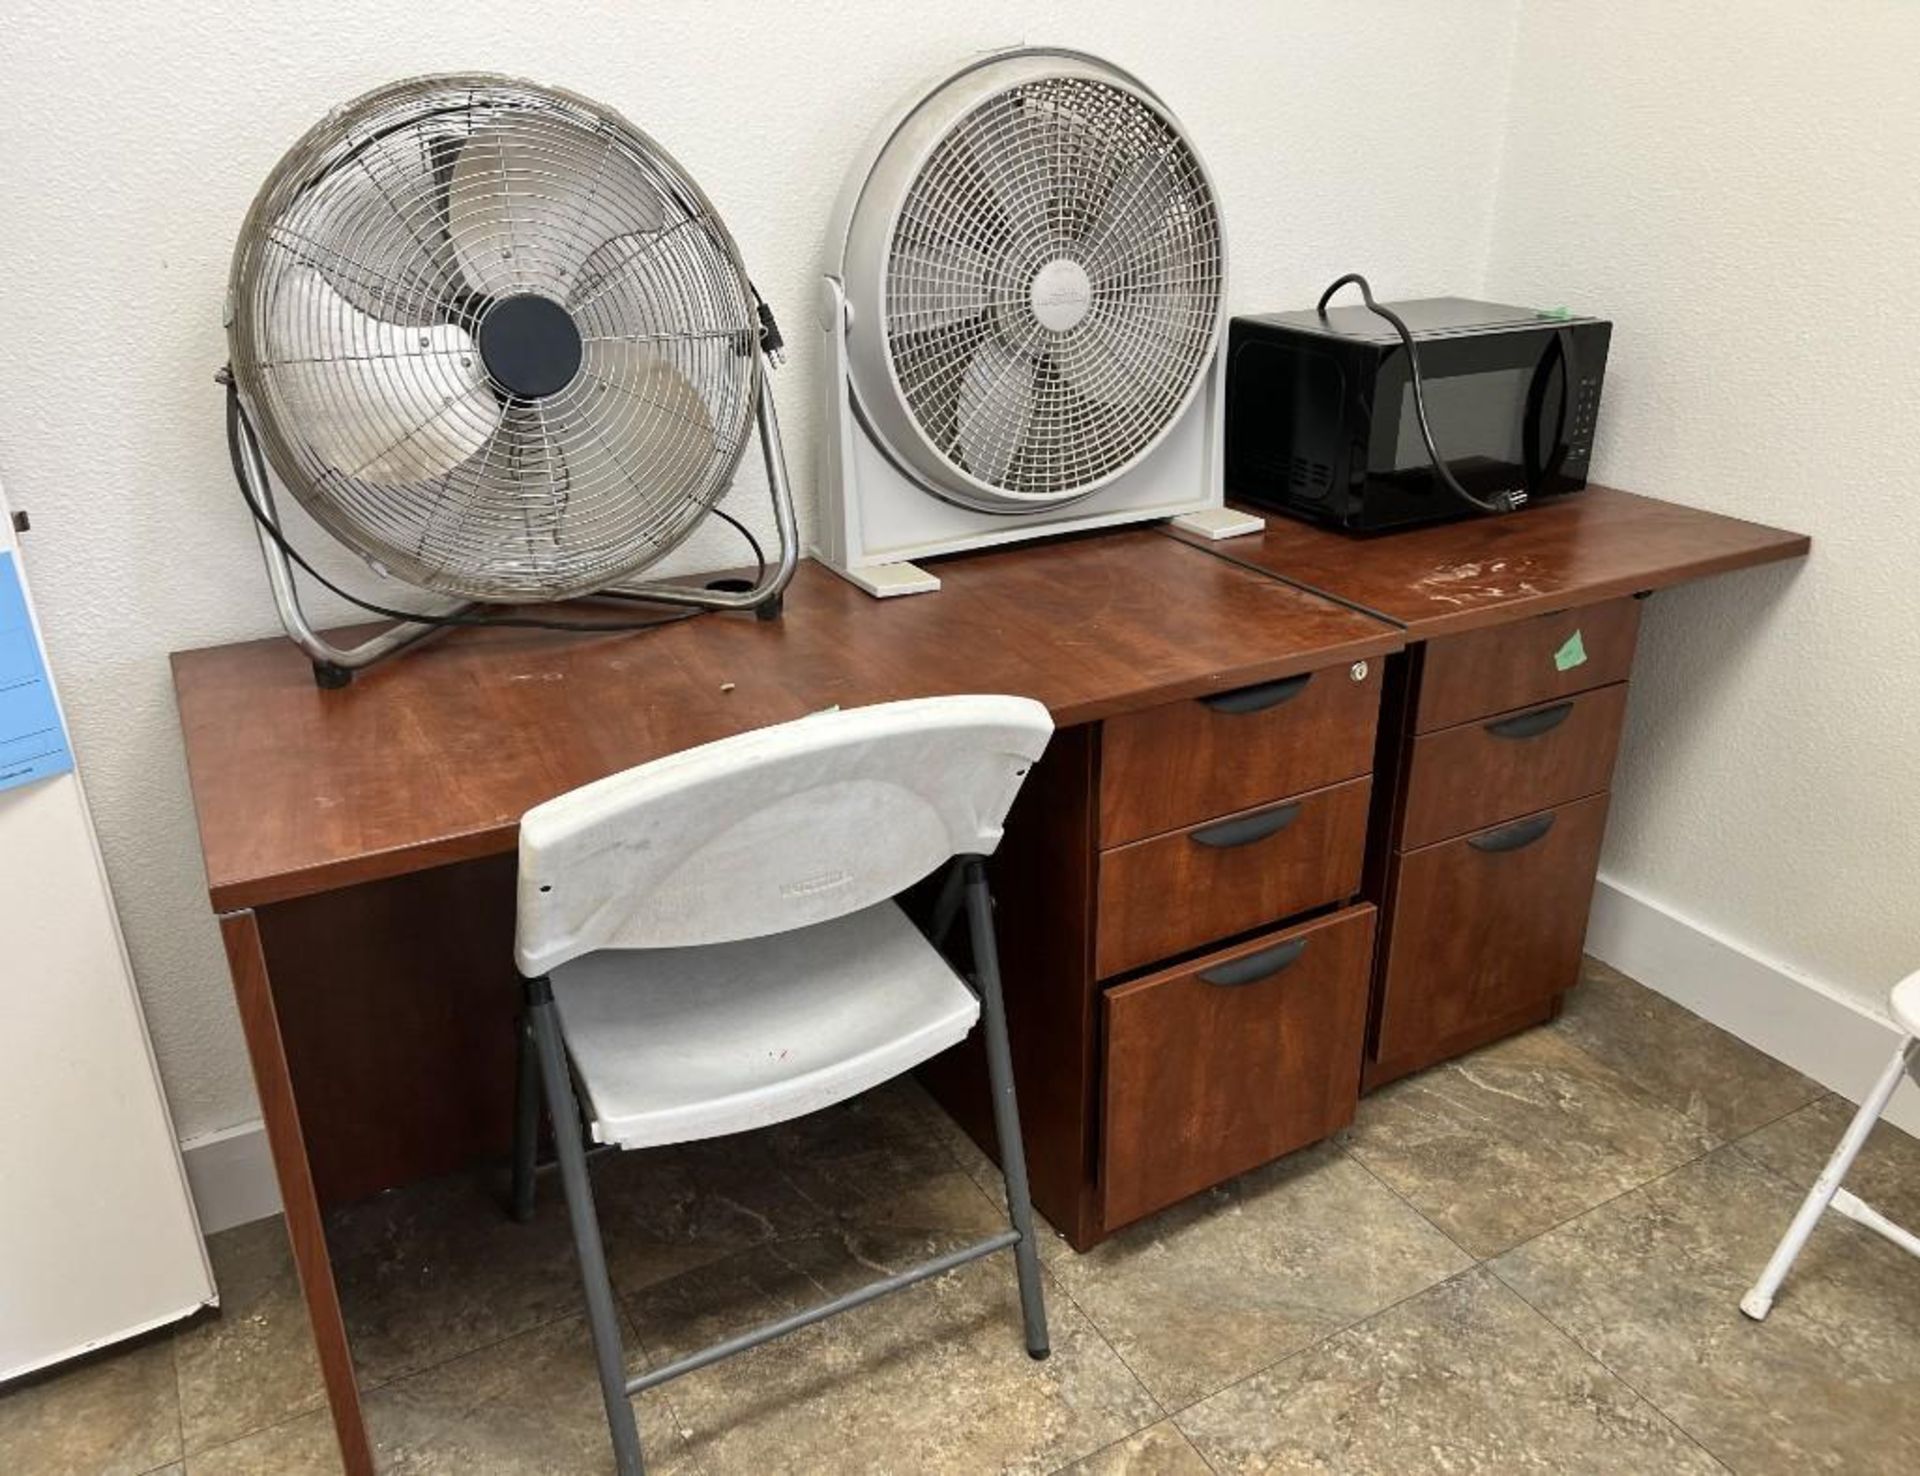 Lot Of Contents Of Room. With table, desk, (3) folding chairs, (2) fans, microwave and (2) file draw - Image 3 of 6